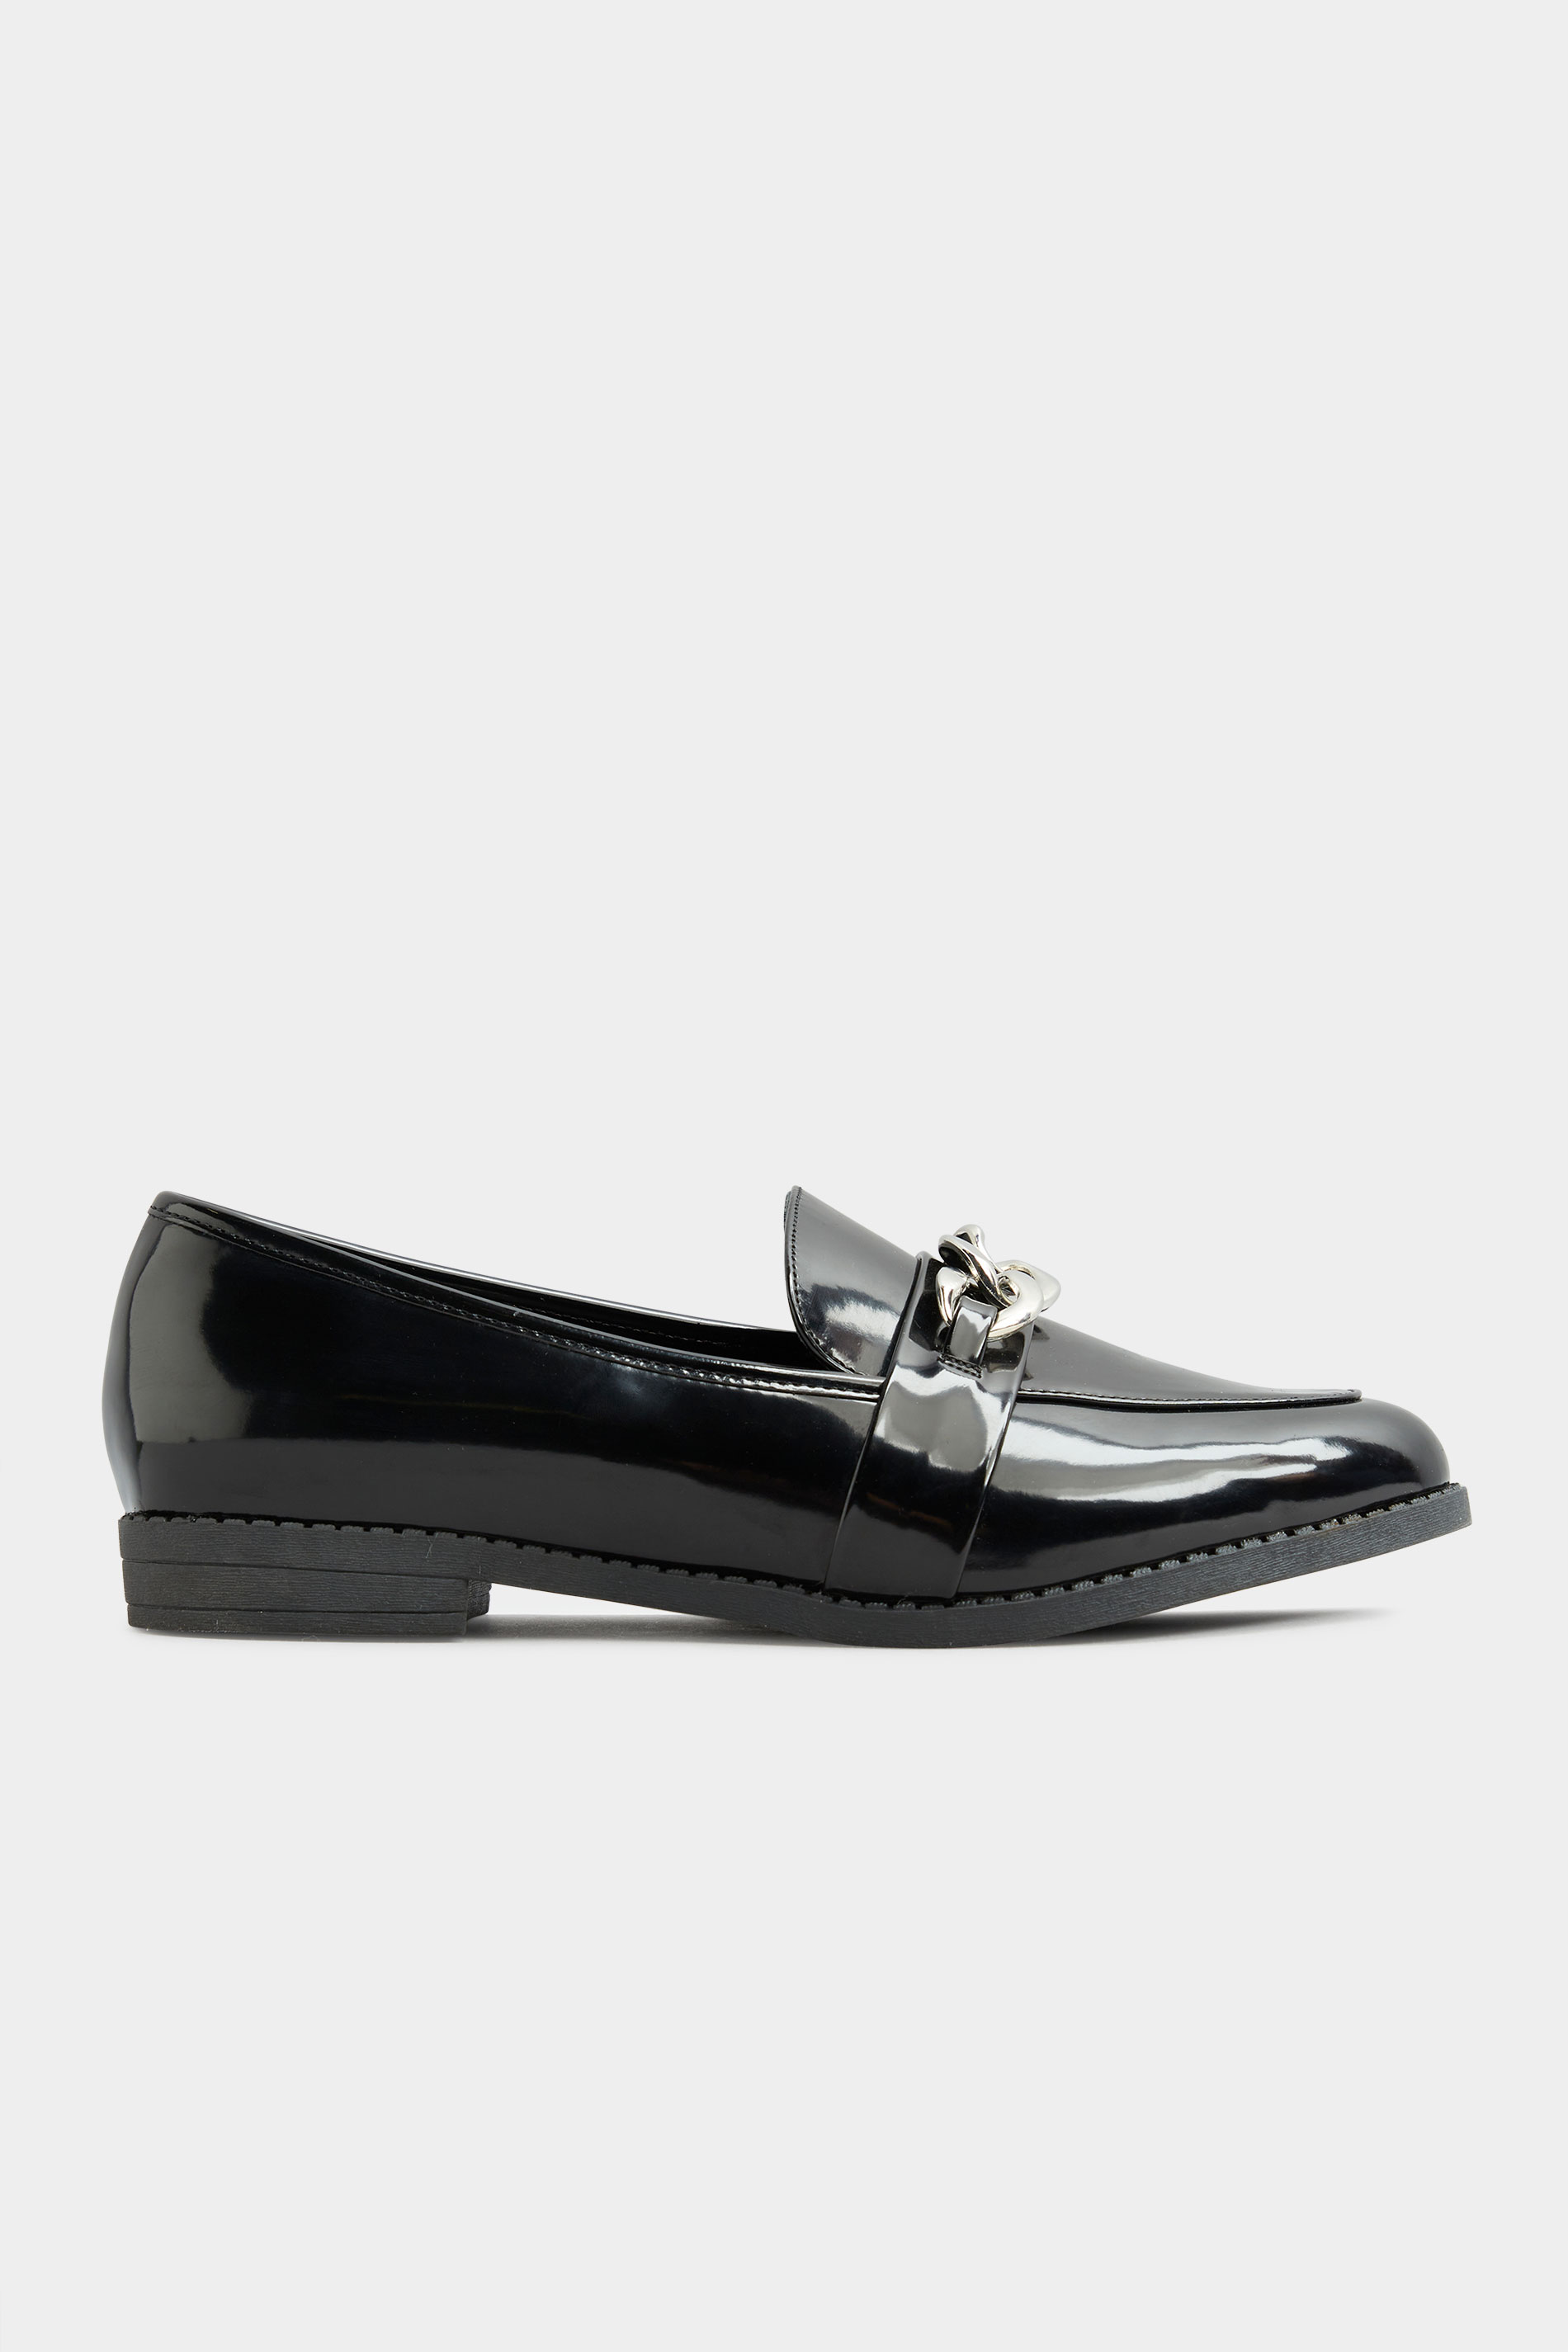 LIMITED COLLECTON Black Patent Chain Loafers In Extra Wide Fit | Long ...